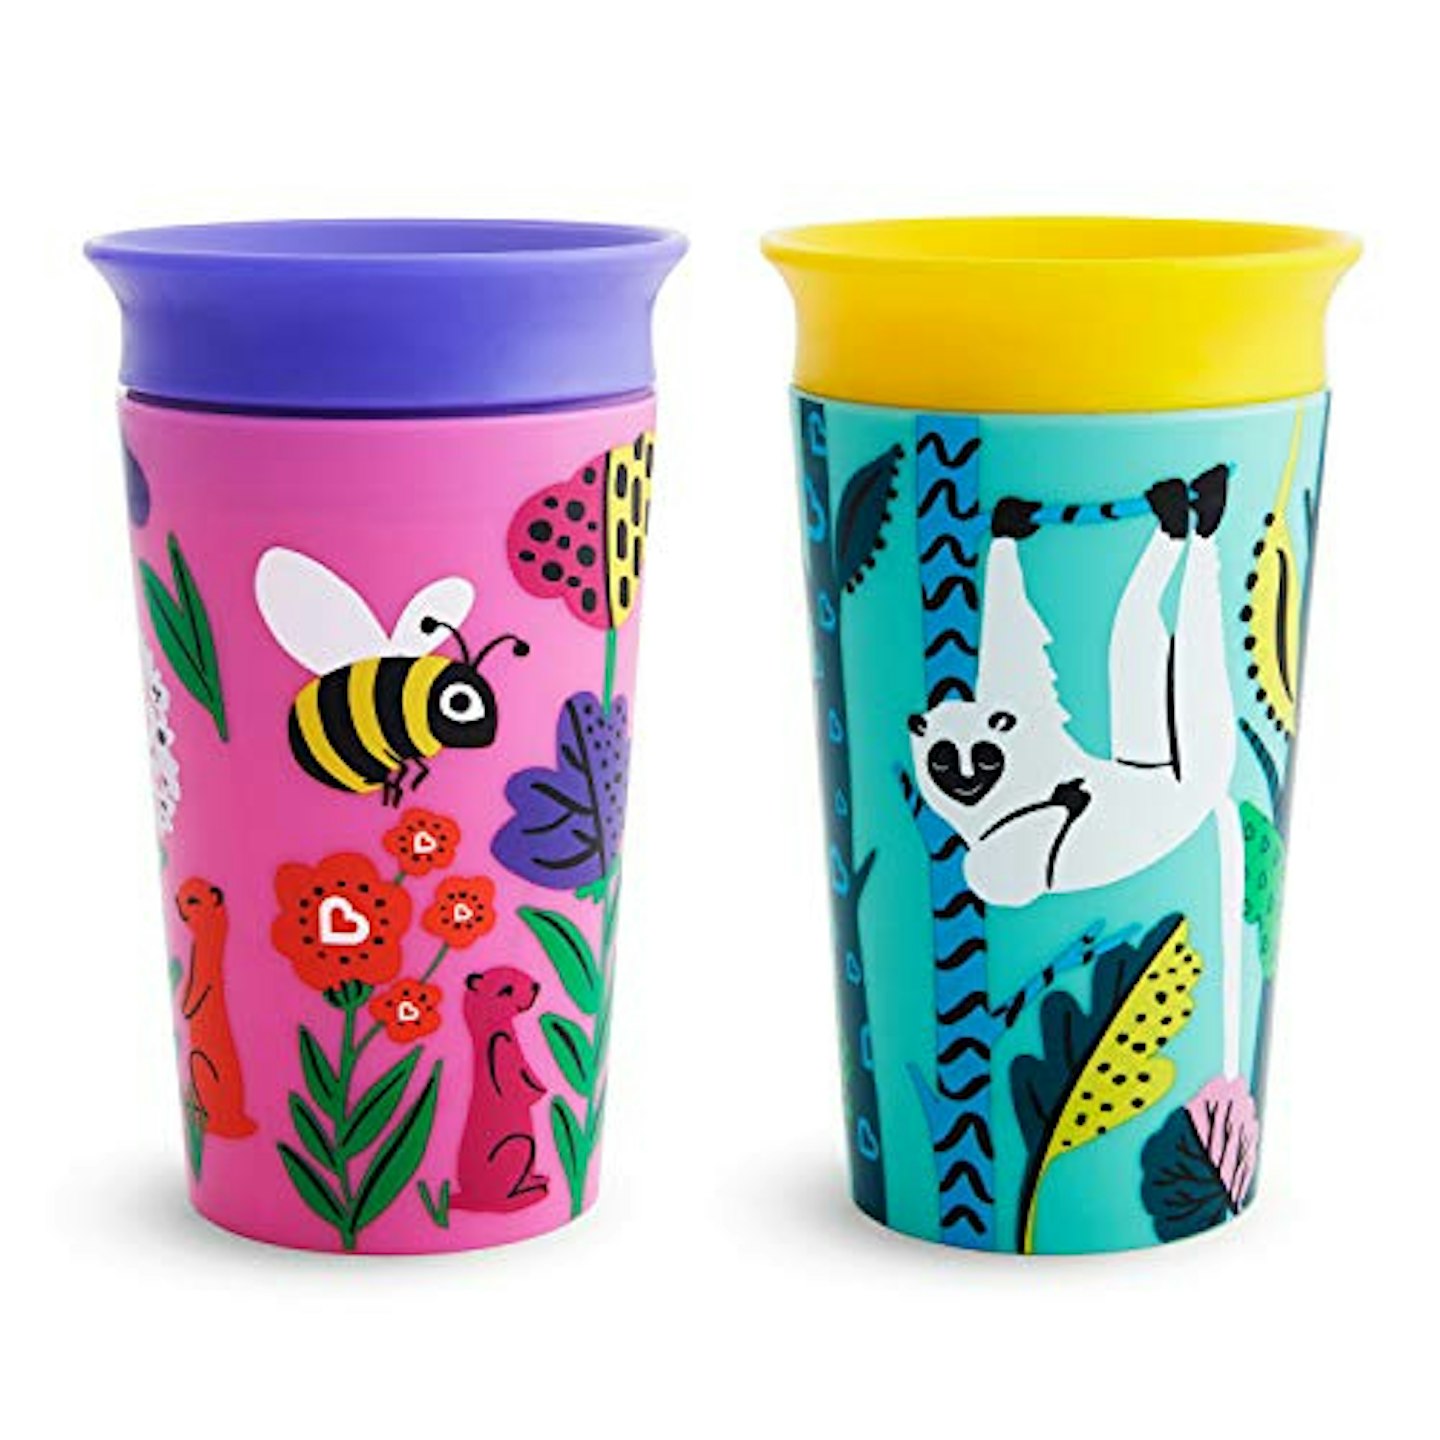 Muchinkin Miracle 360 WlildLove No-Spill Sippy Cup (2 Pack)